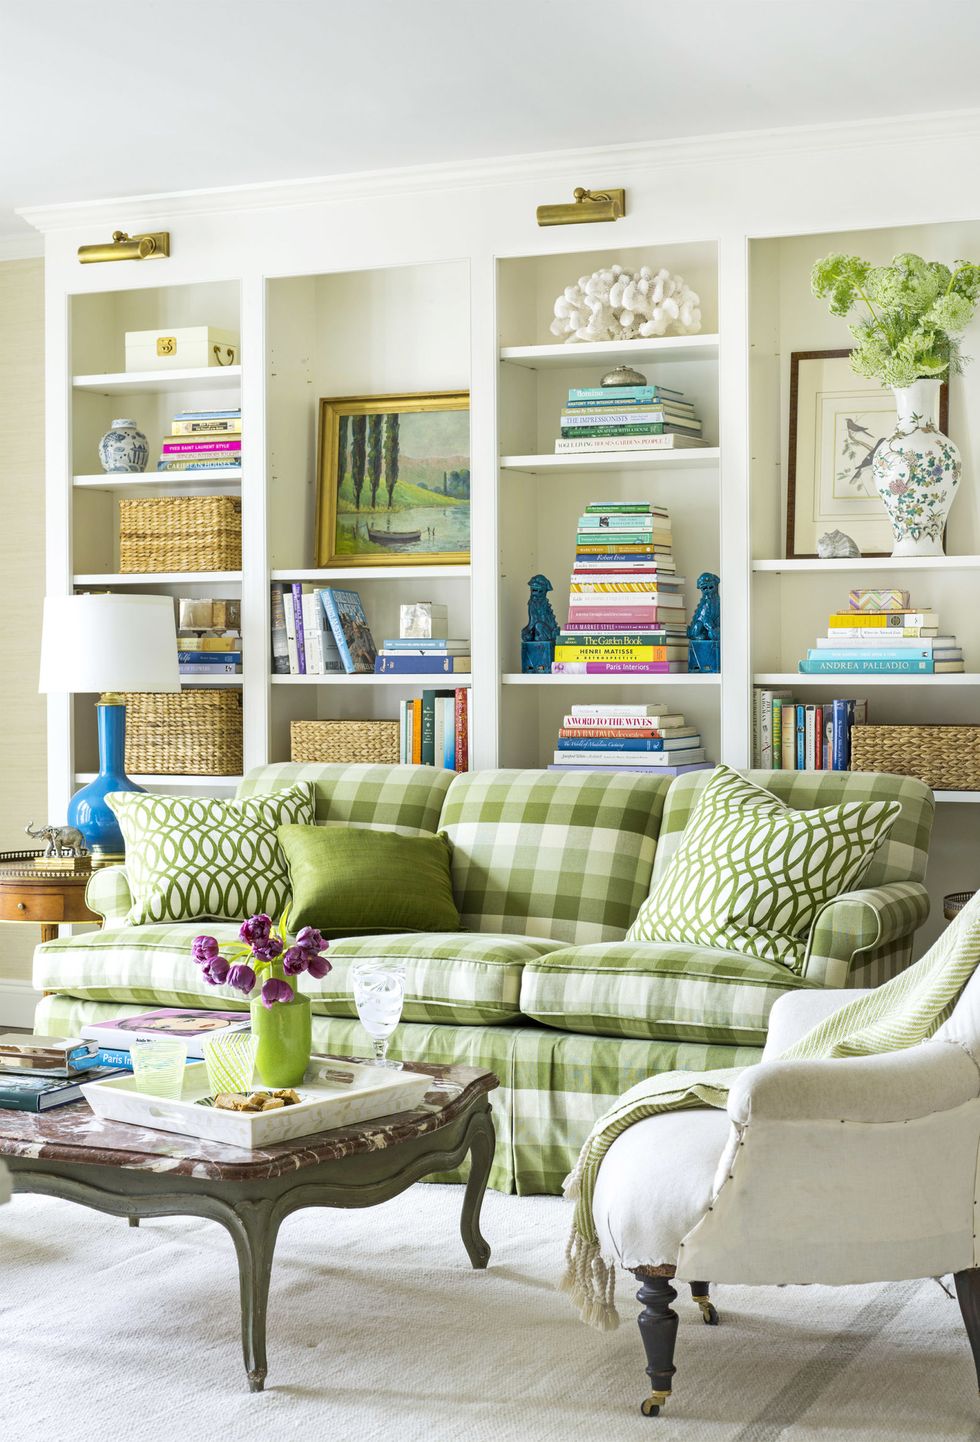 Colour series: Decorating with Sage Green - The English Home